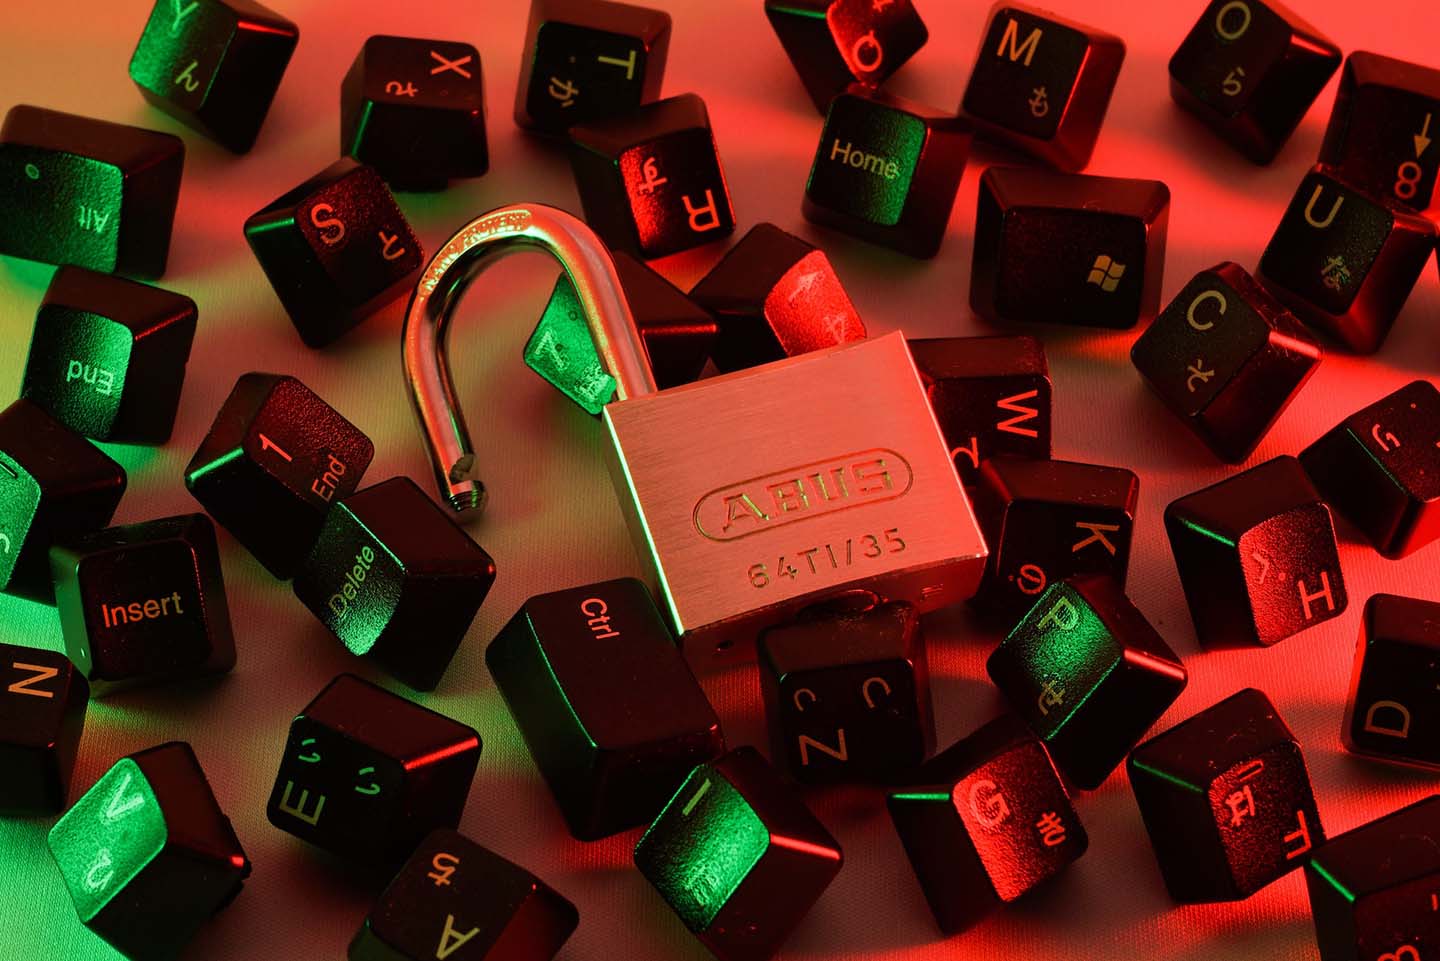 Open lock surrounded by keyboard keys, representing a security breach